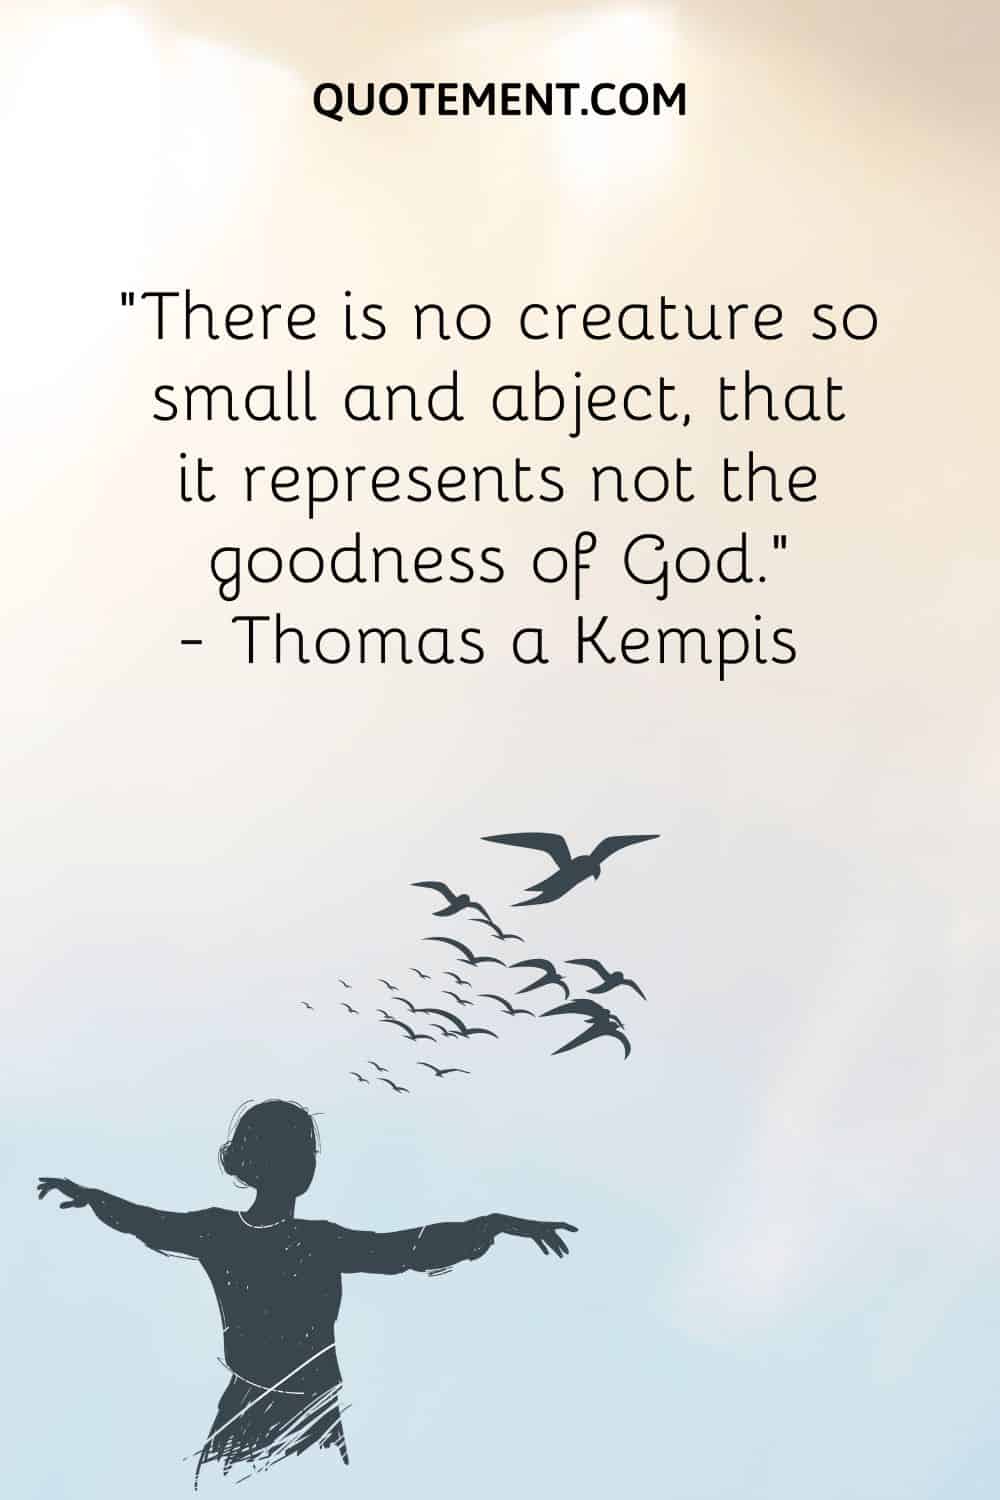 “There is no creature so small and abject, that it represents not the goodness of God.” — Thomas a Kempis